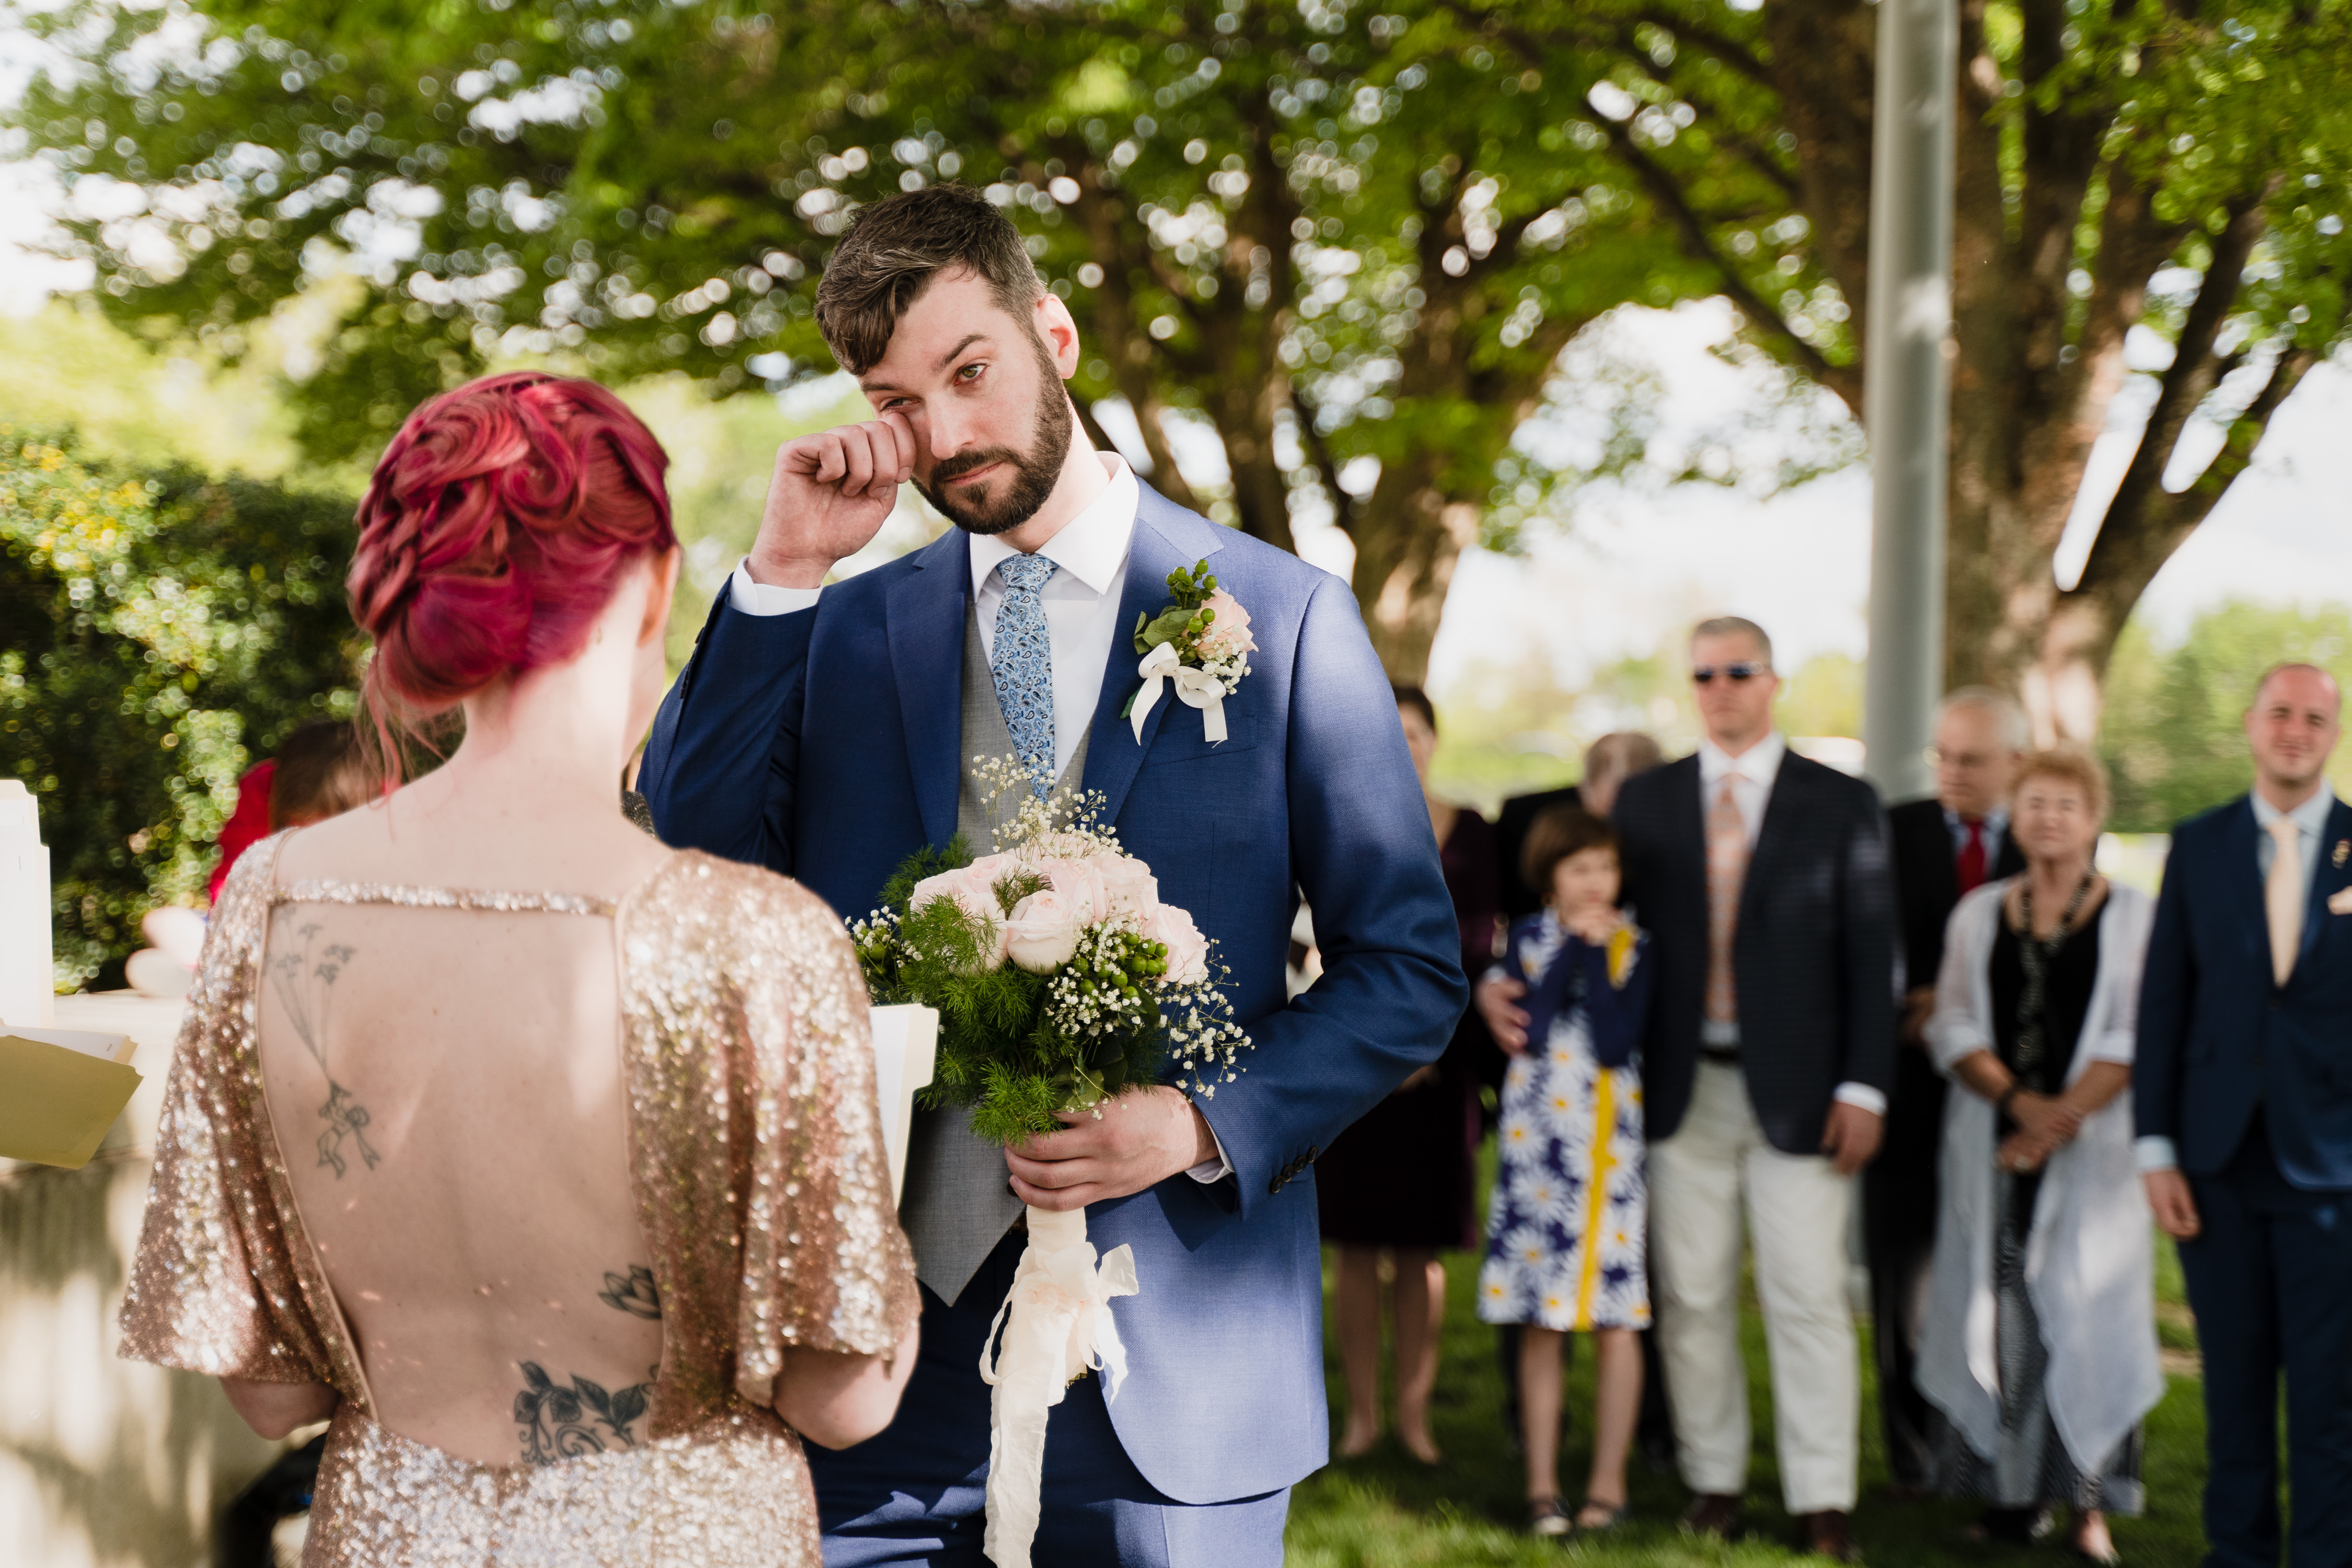 A man tears up as his bride reads her wedding vows during their wedding ceremony